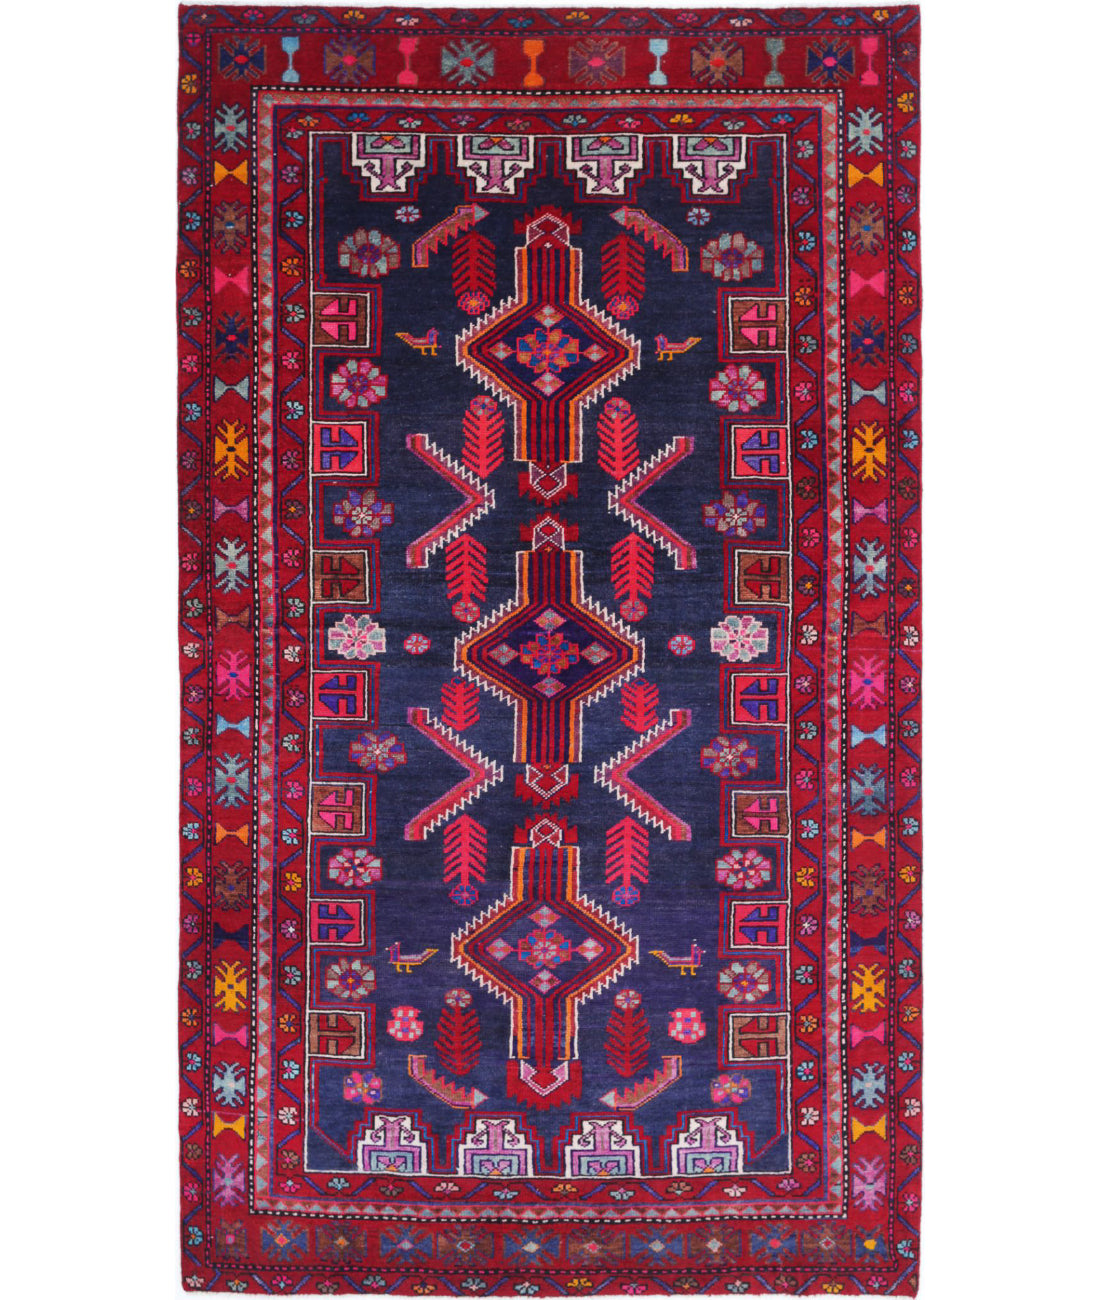 Hand Knotted Persian Hamadan Wool Rug - 4&#39;10&#39;&#39; x 8&#39;10&#39;&#39; 4&#39;10&#39;&#39; x 8&#39;10&#39;&#39; (145 X 265) / Blue / Red